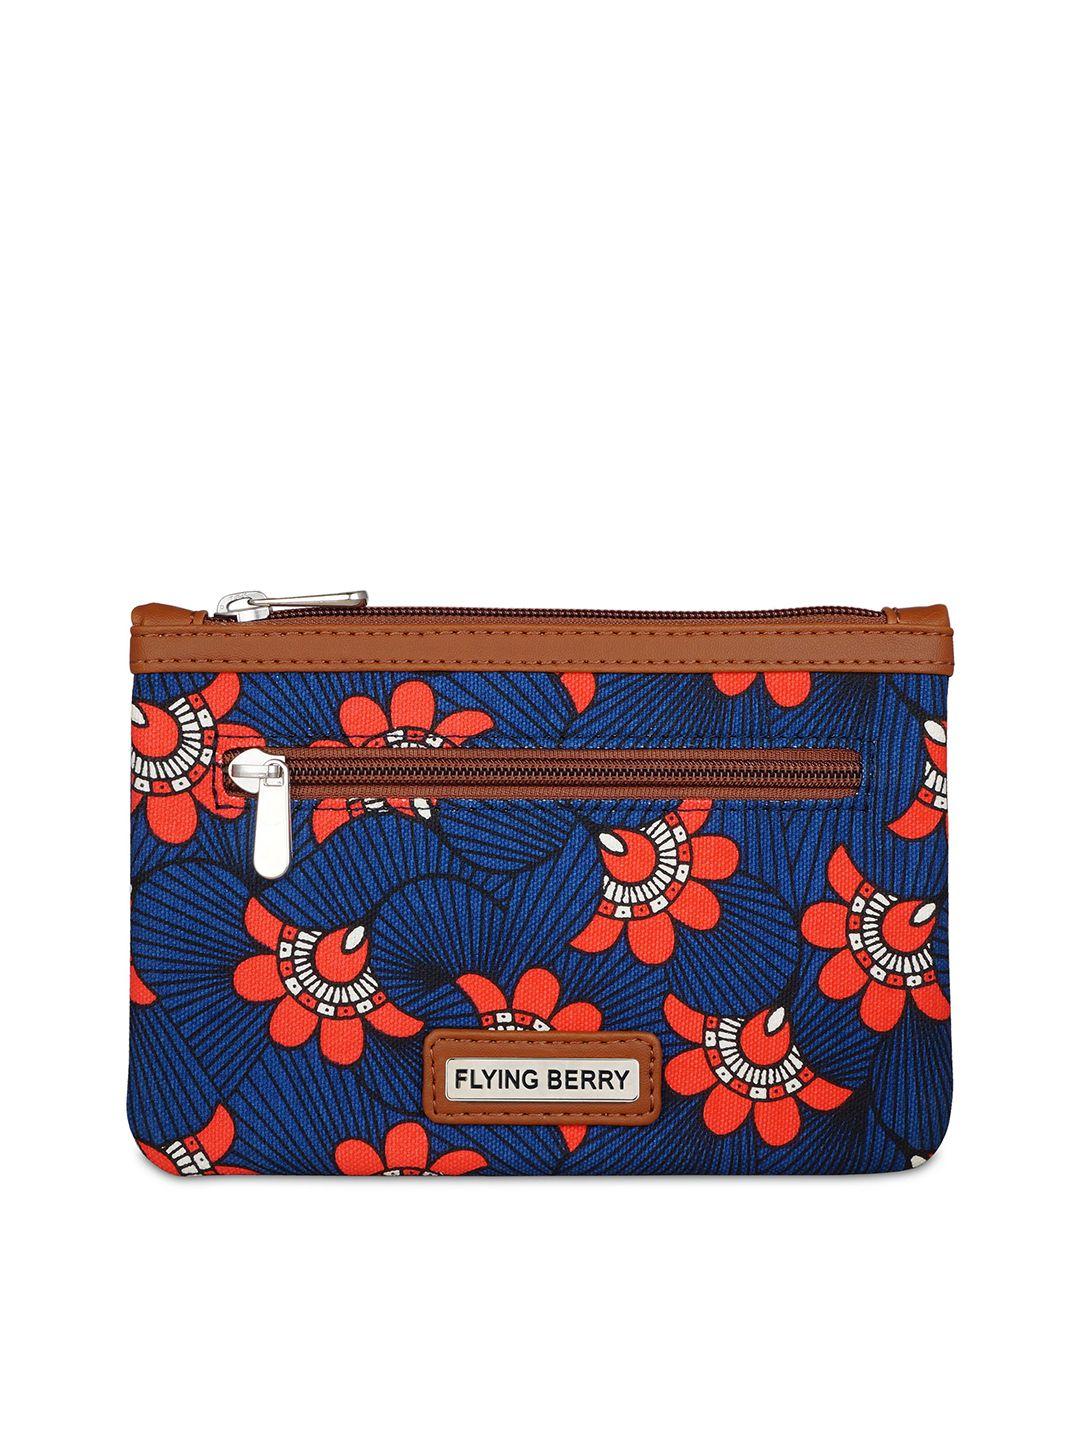 flying-berry-floral-printed-structured-shoulder-bag-with-pouch